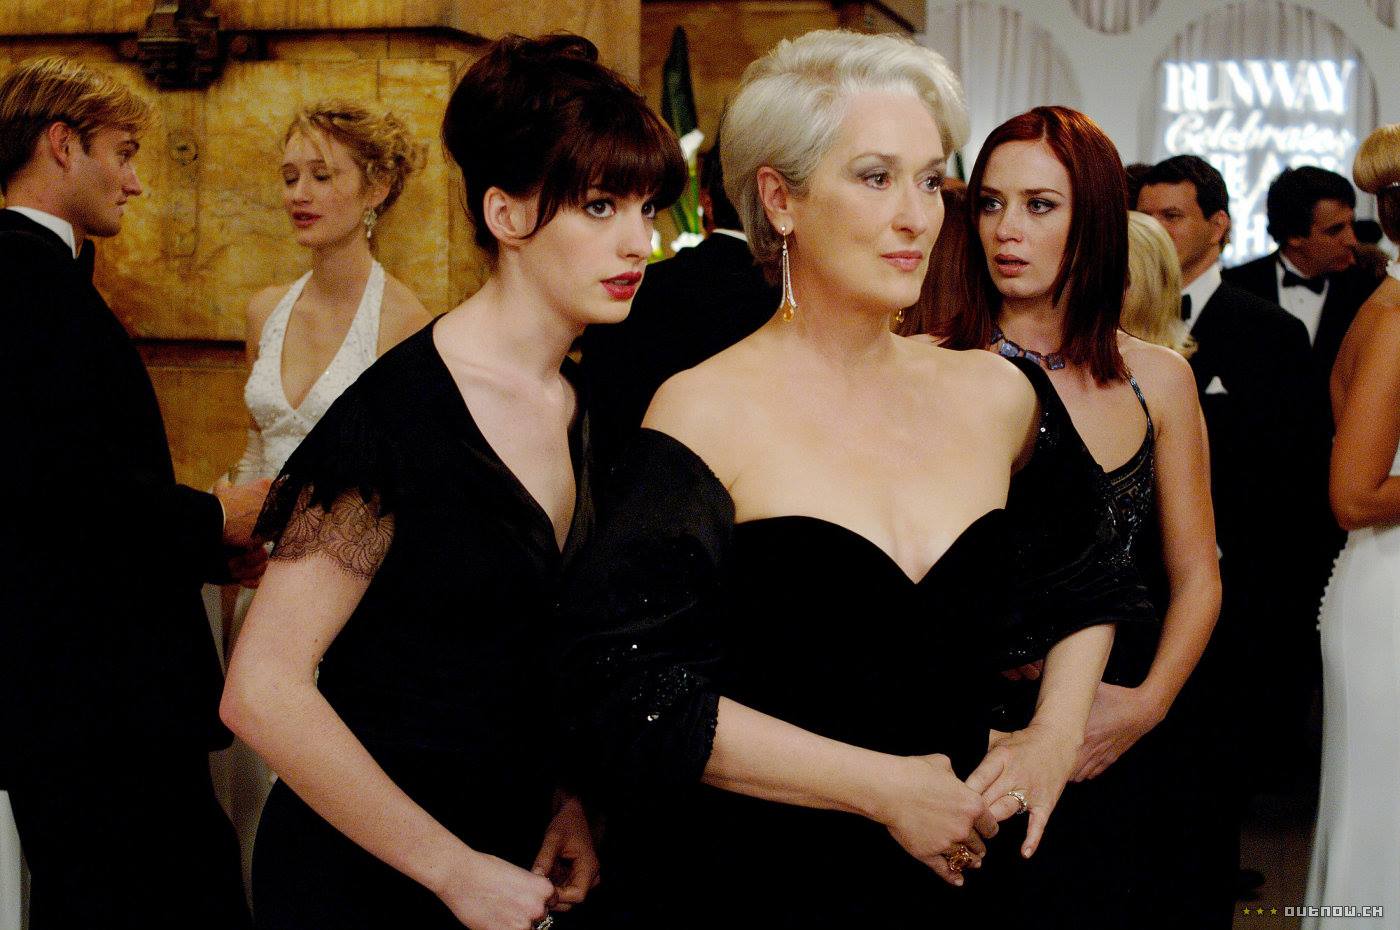 6 things to know about 'The Devil Wears Prada' Stars tell all on film